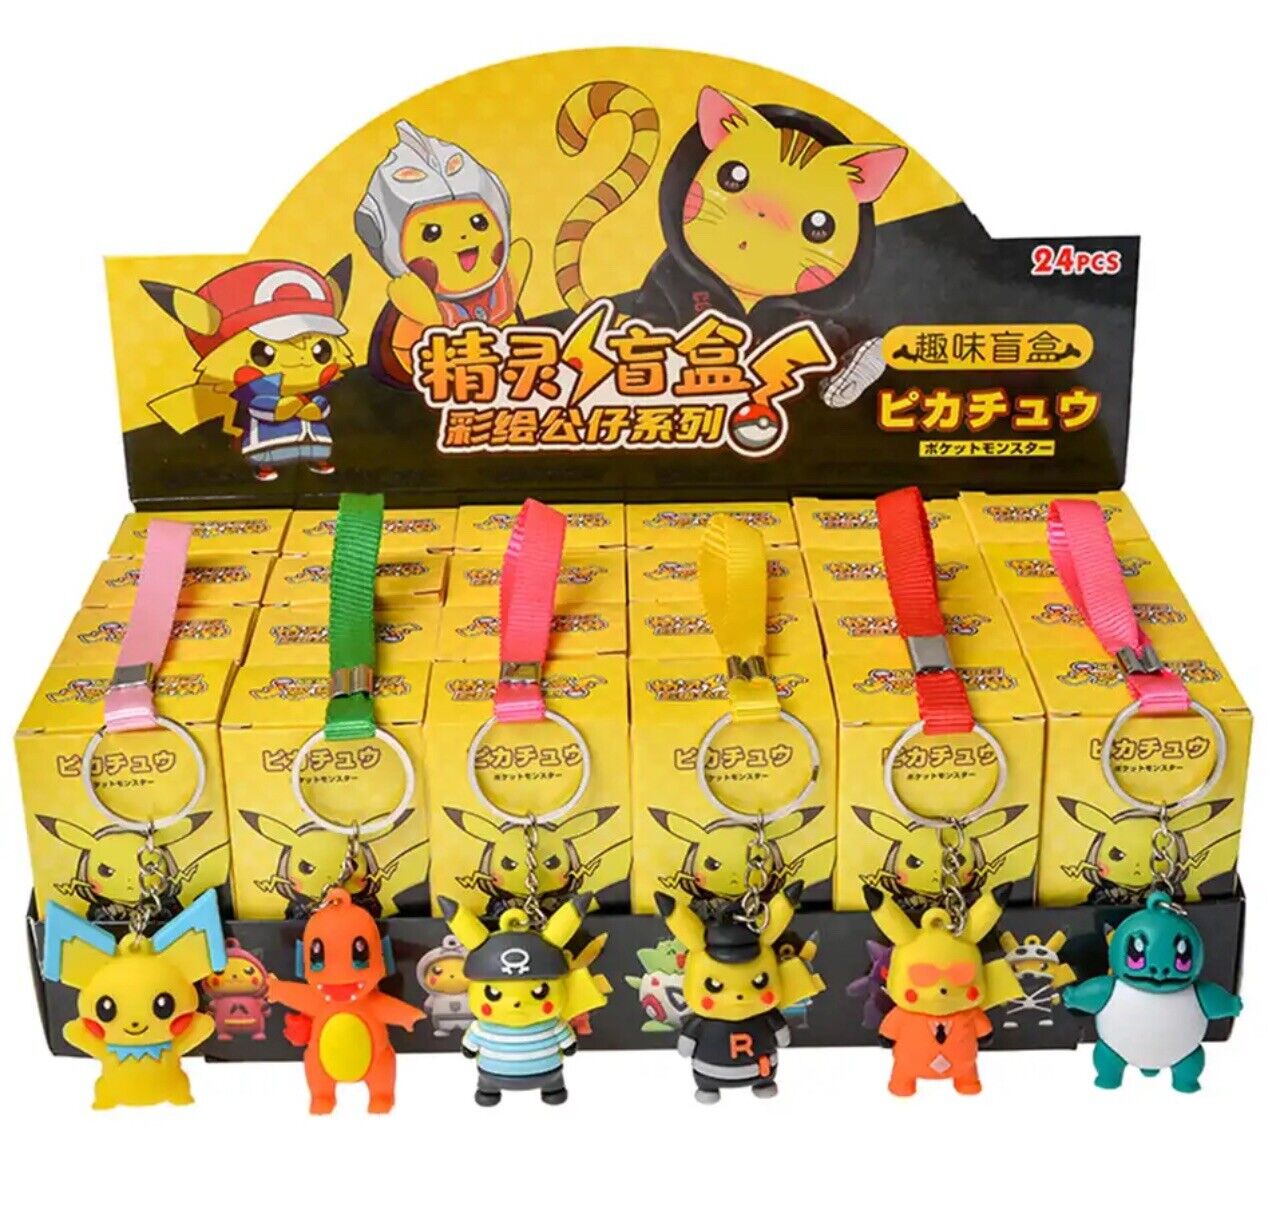 1 Mystery Keychain Blind Box Figurine Pikachu Silicone Gengar Togapi Squirtle